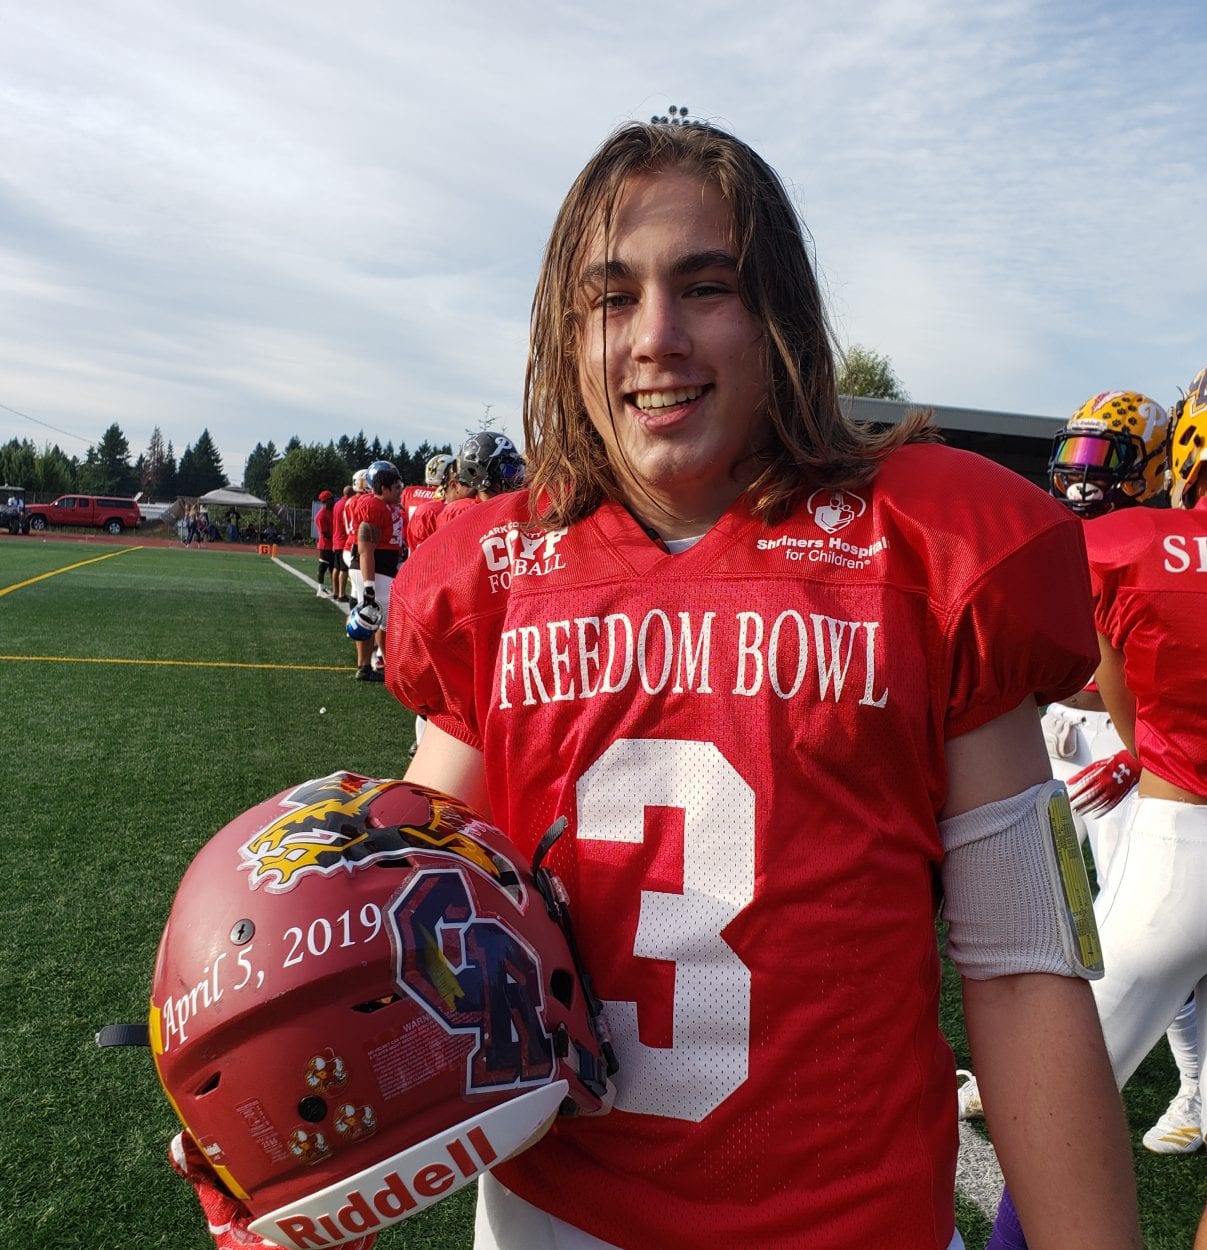 Jake Clark of Prairie shows off a special date on his helmet prior to Saturday’s Freedom Bowl Classic. He dedicated the game to a family friend, who passed away on that day.